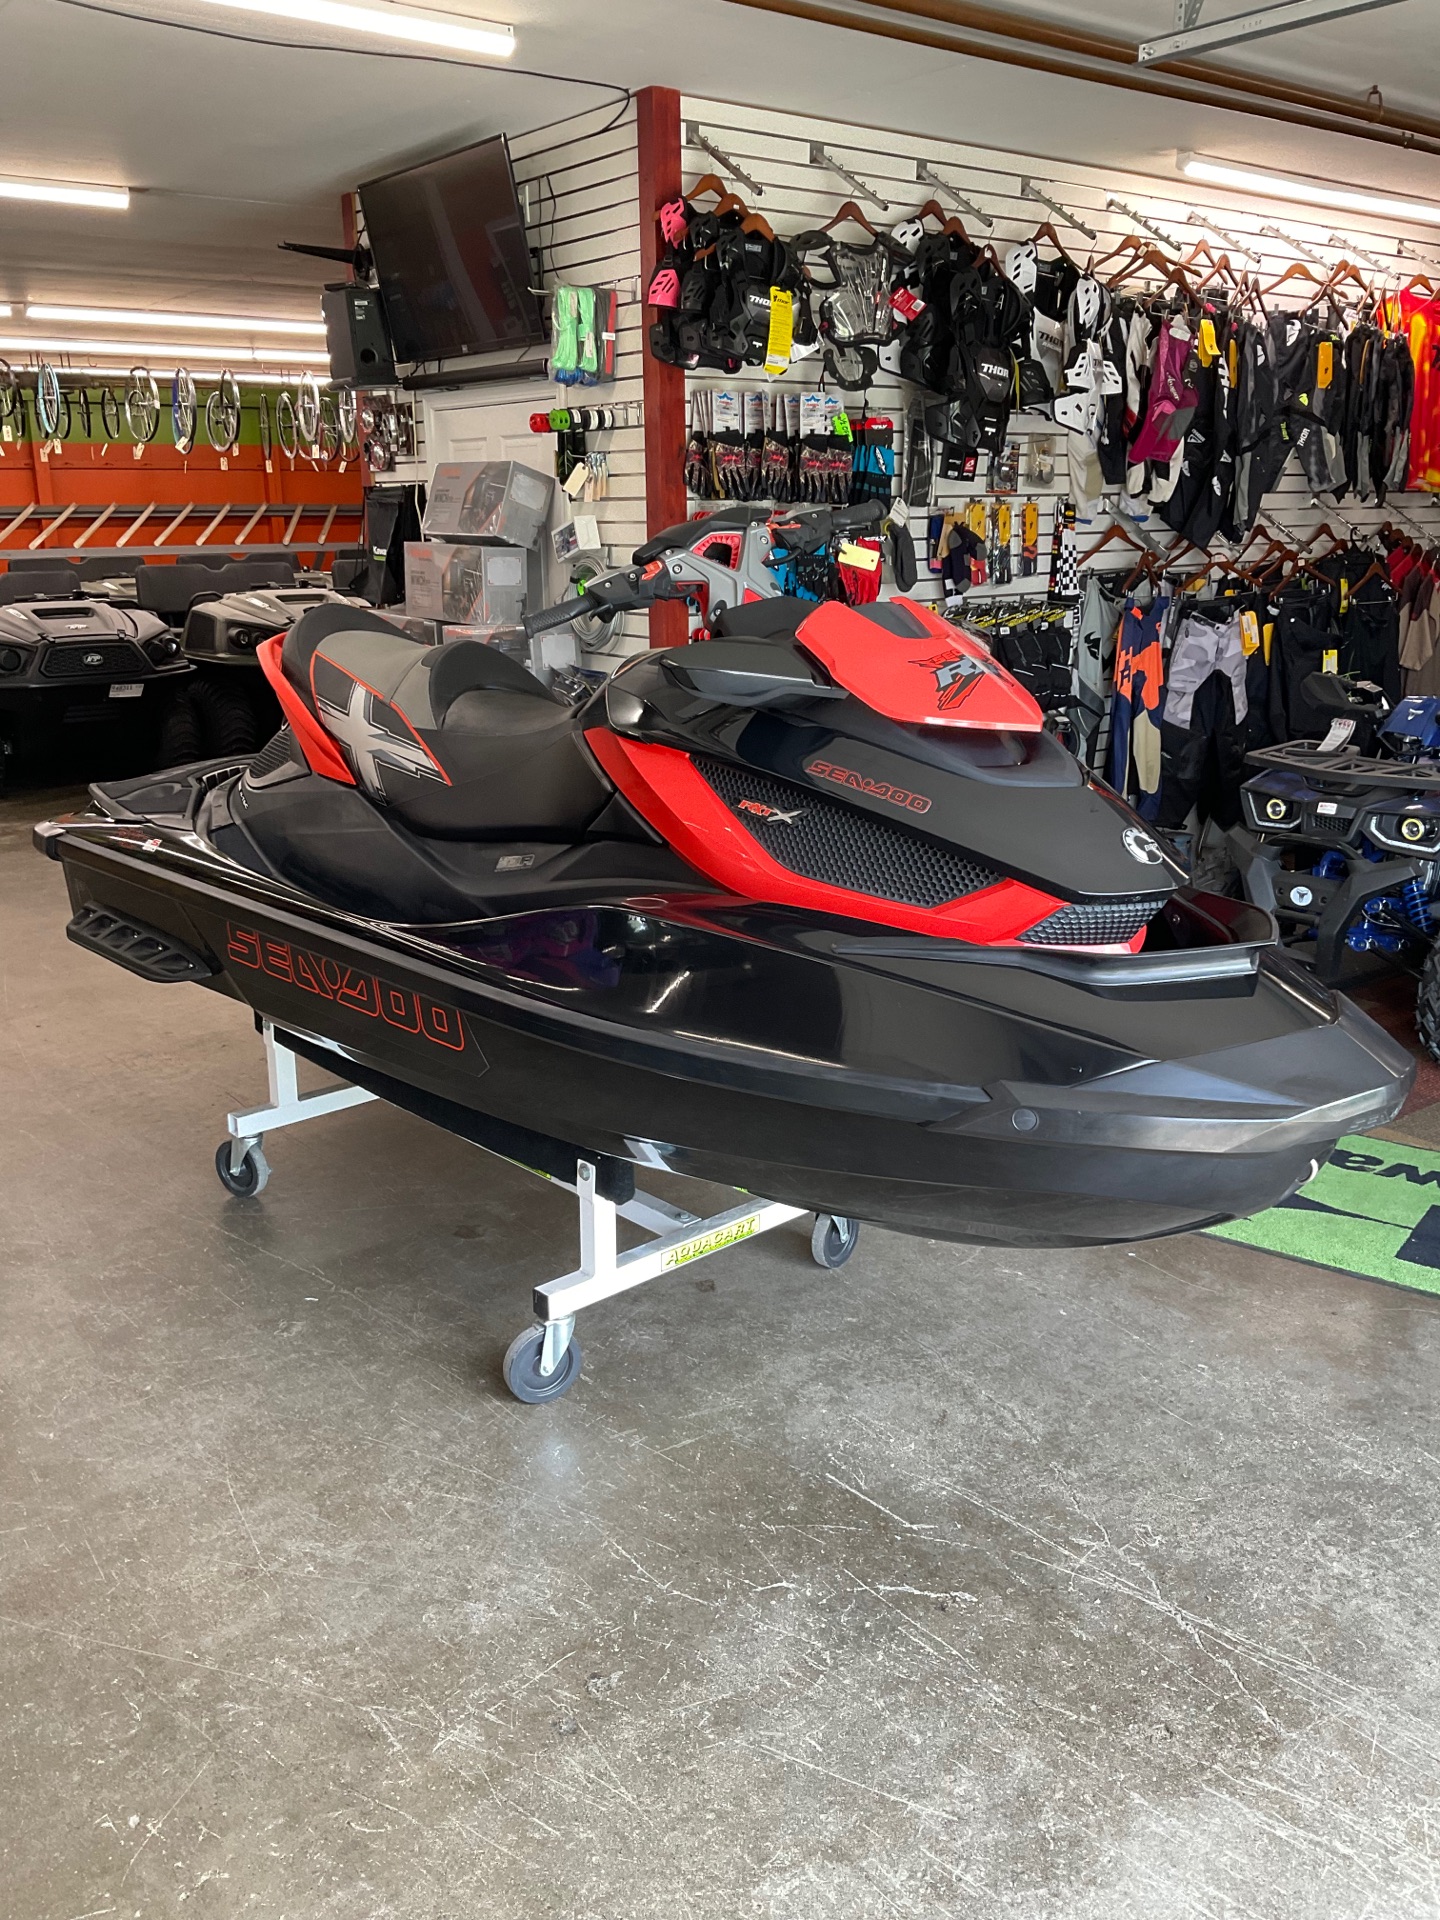 2011 Sea-Doo RXT AS 260 in Howell, Michigan - Photo 1